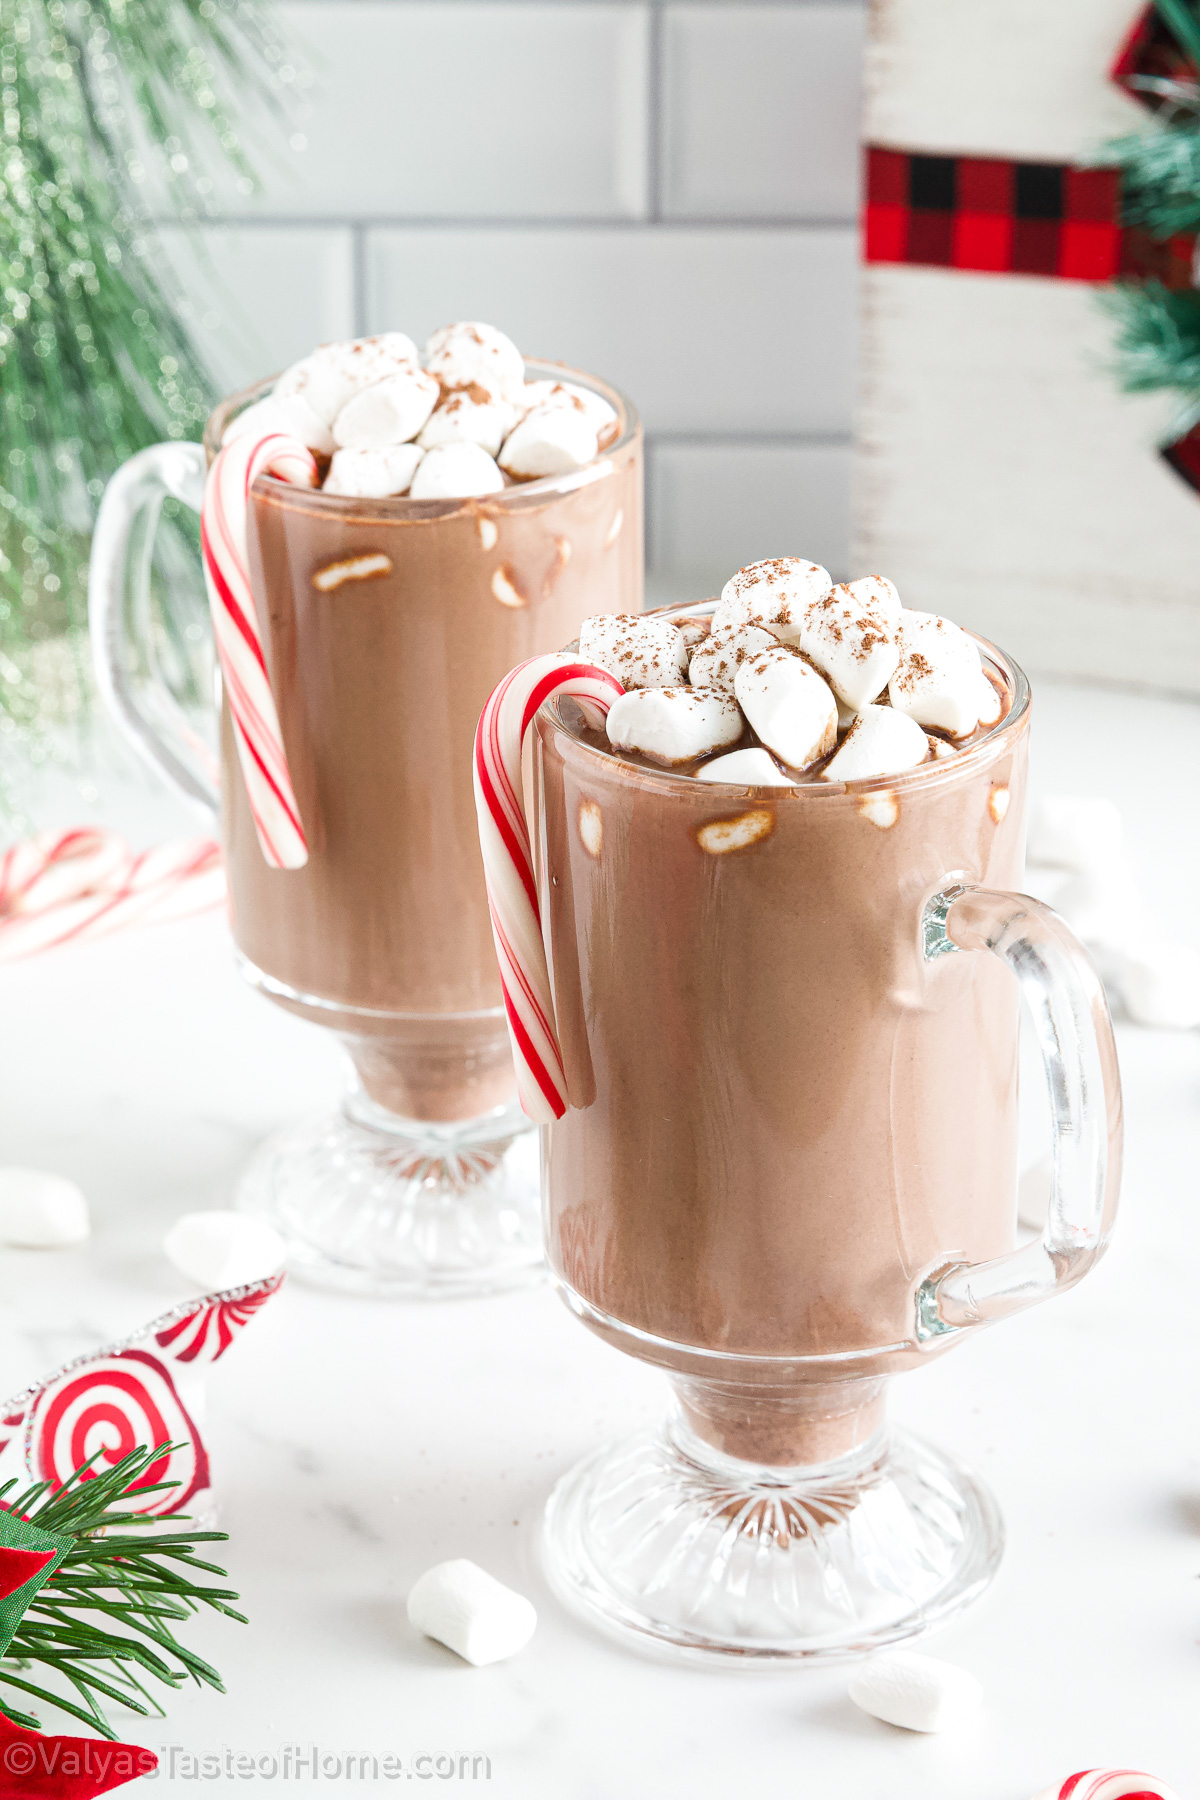 This is seriously the one drink that not only kids love but so do adults! I don’t know a single person who doesn’t love this delicious drink so it’s the perfect one to surprise your family with during the holidays.